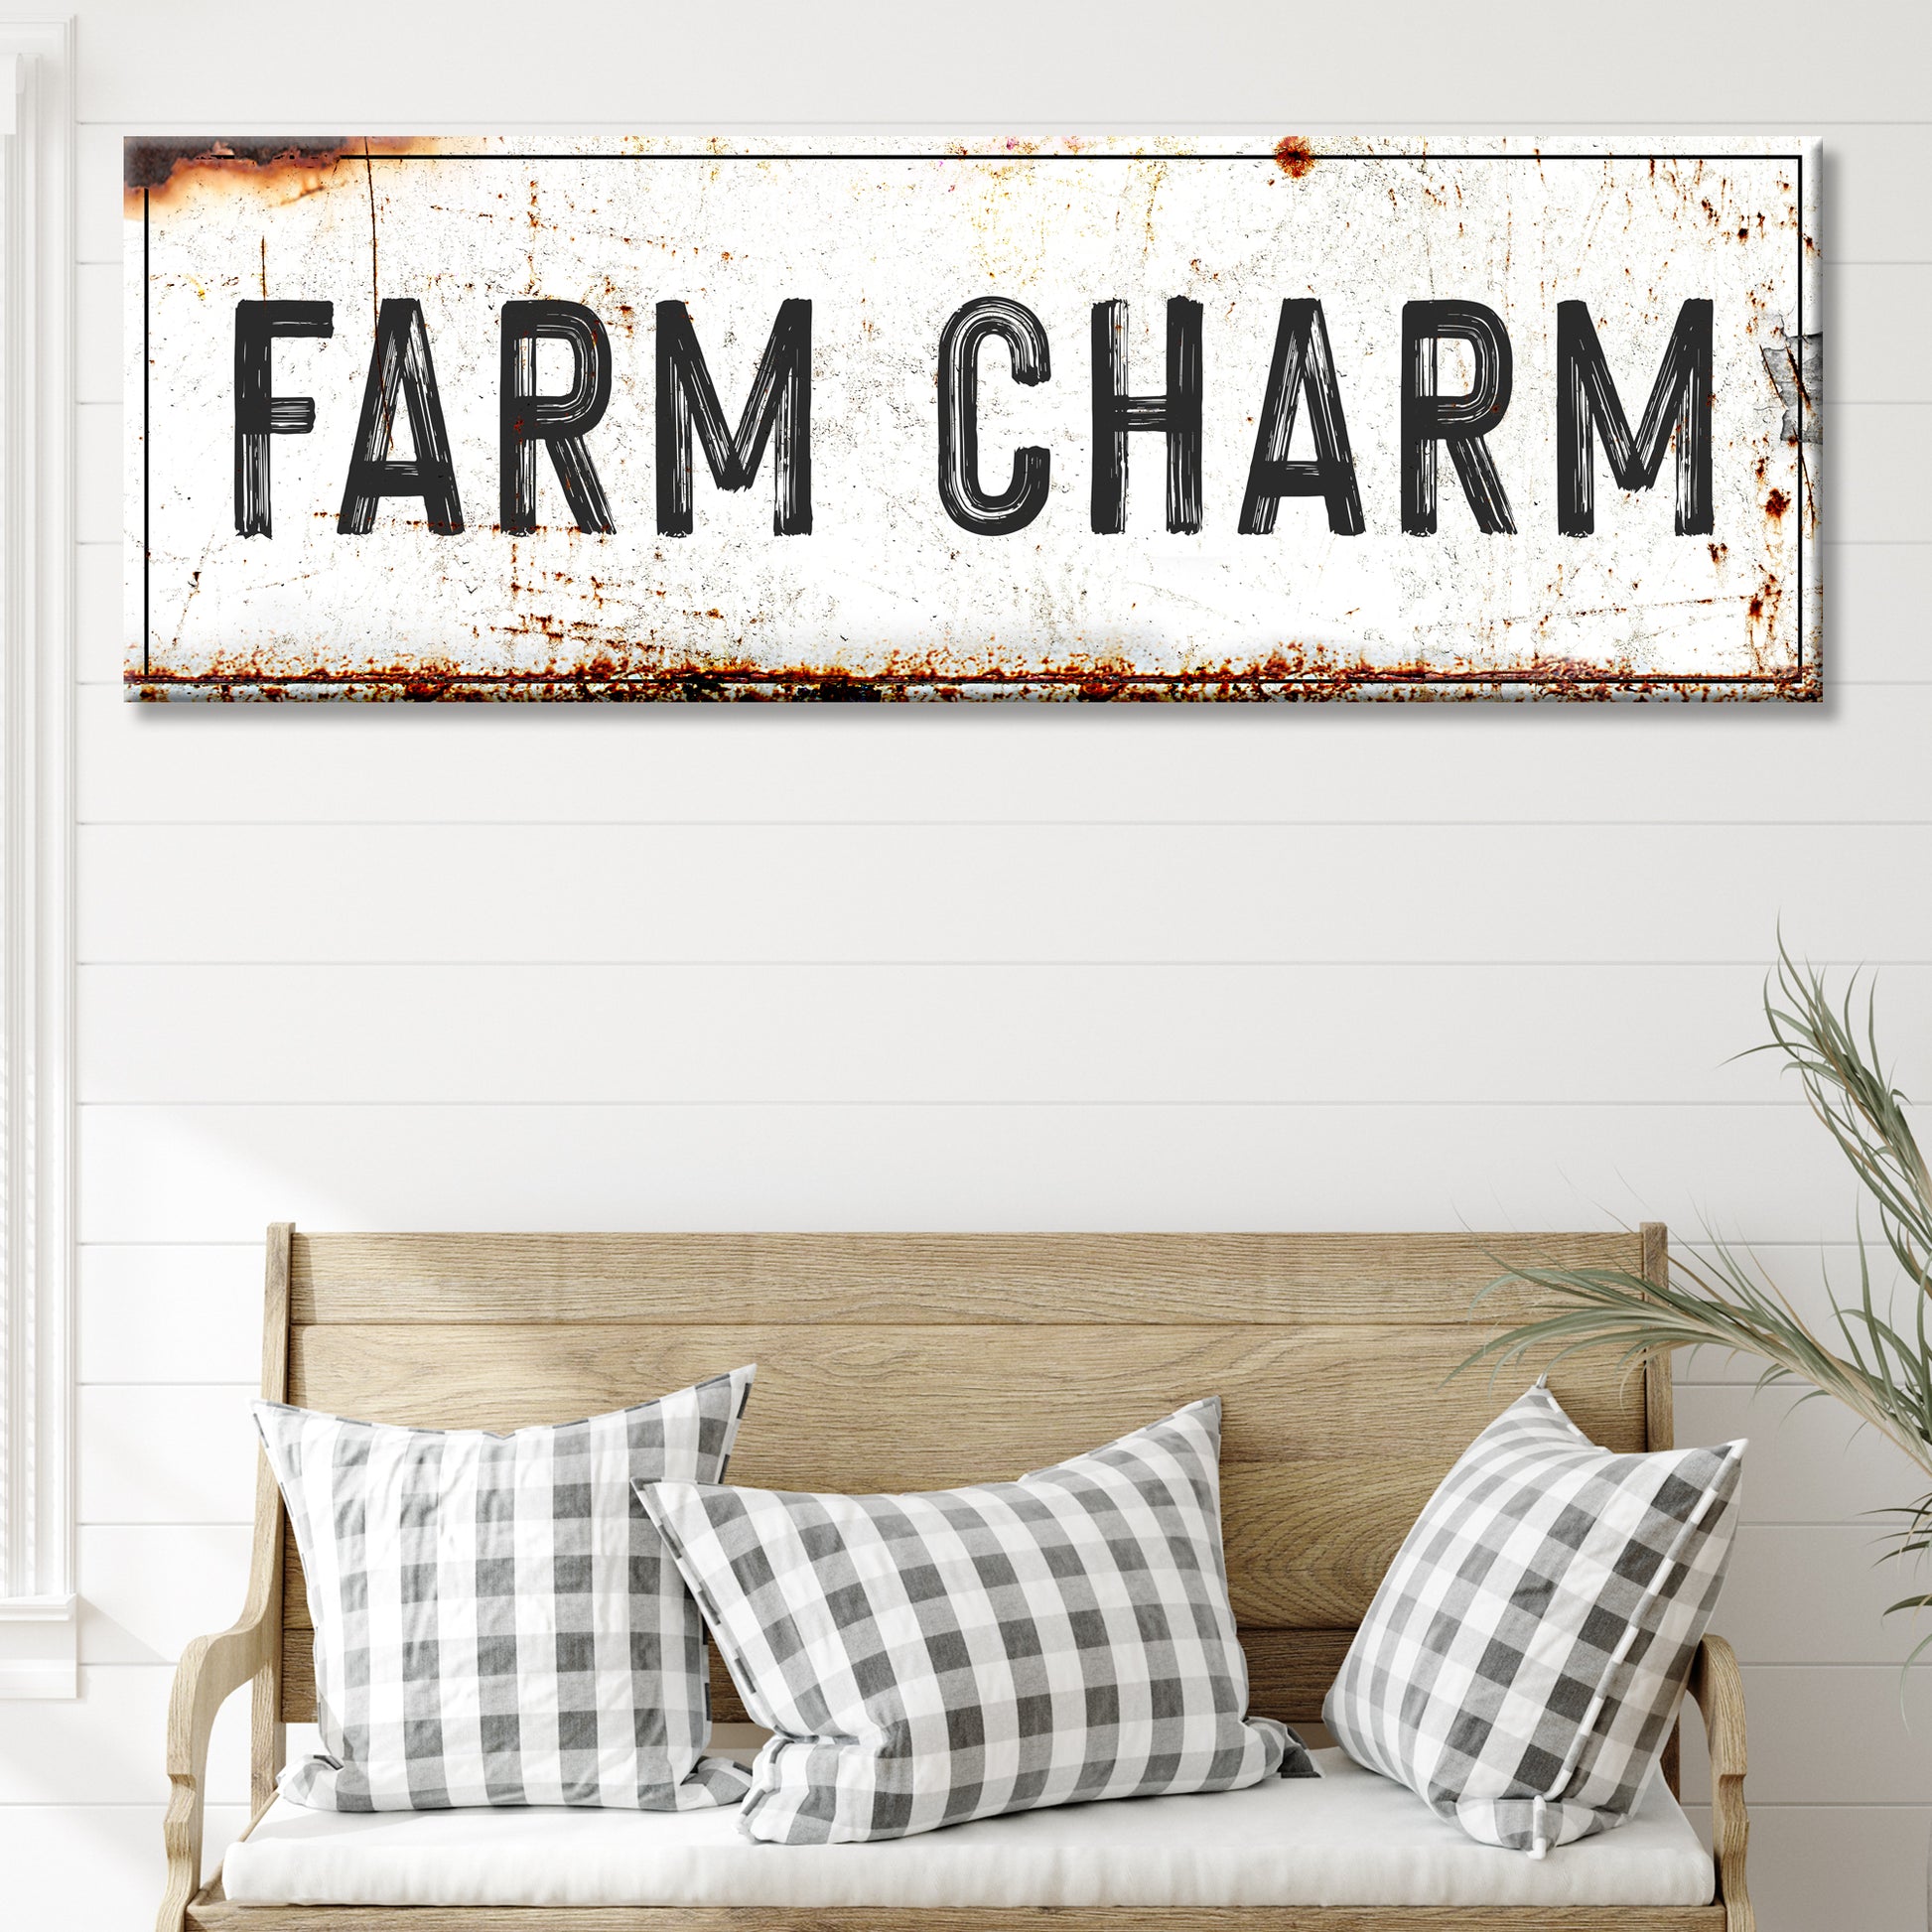 Farm Charm Sign - Image by Tailored Canvases